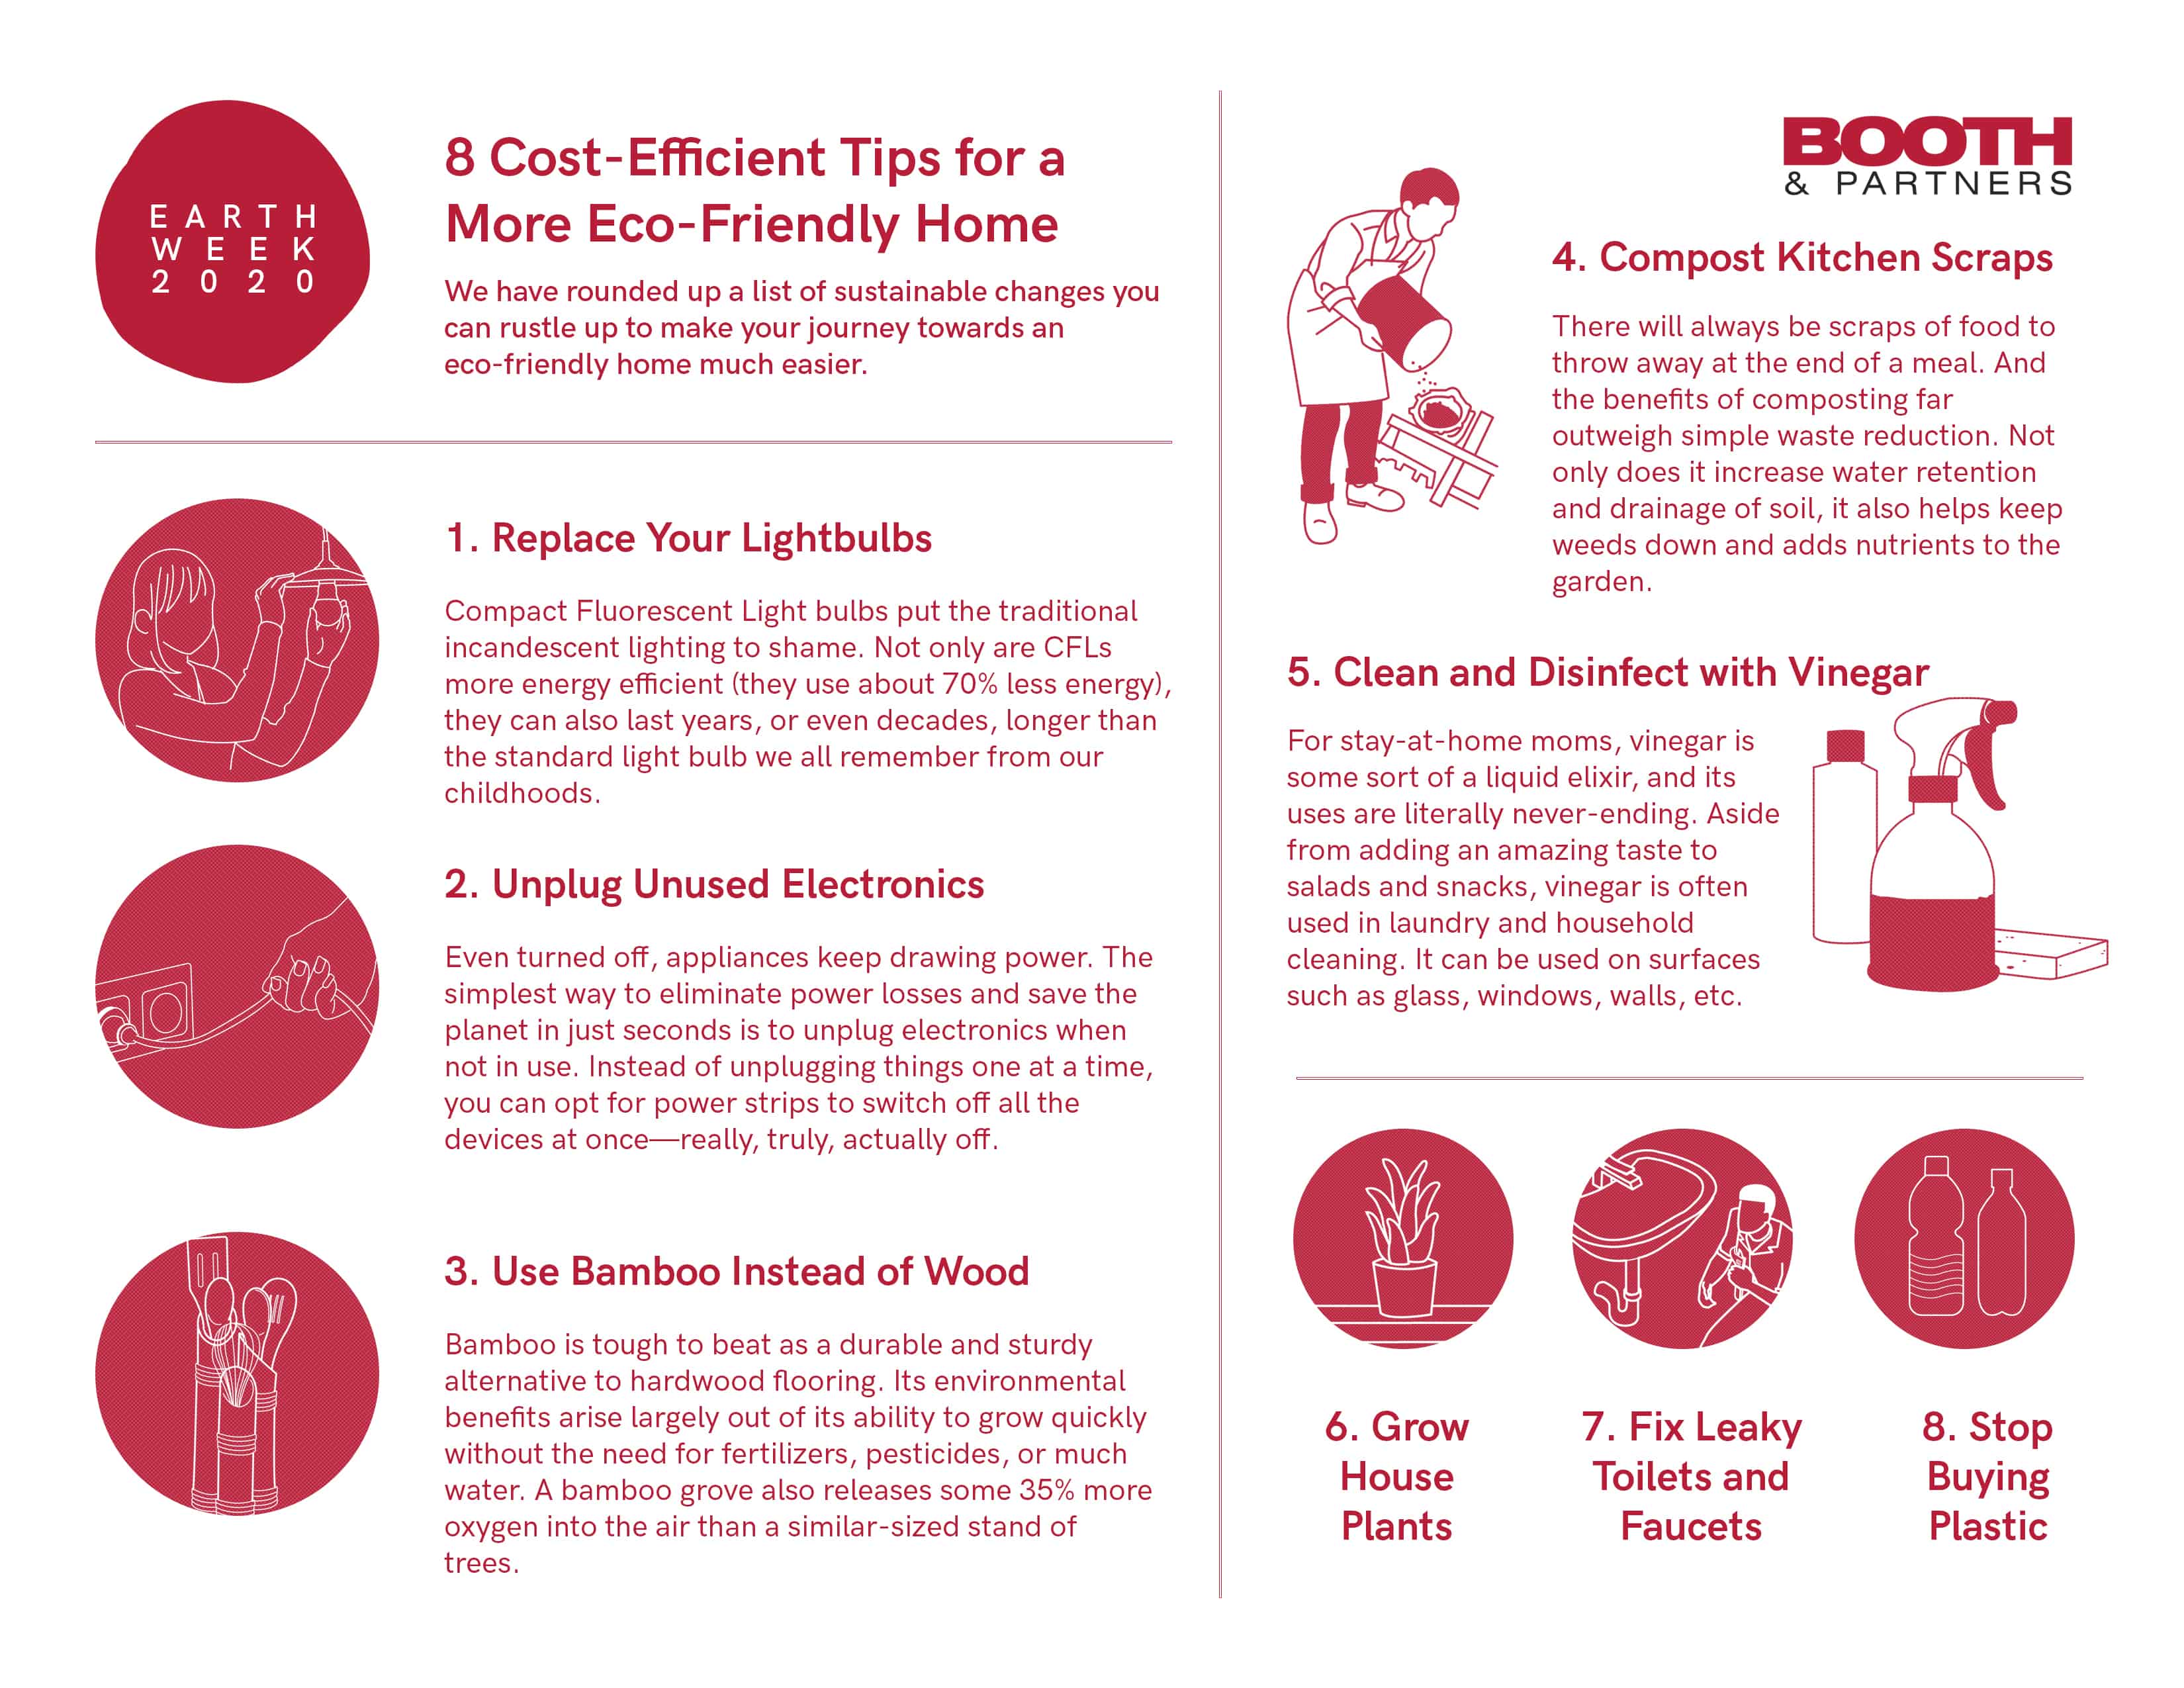 8 Cost Efficient Tips_INFOG - Booth & Partners - Blog